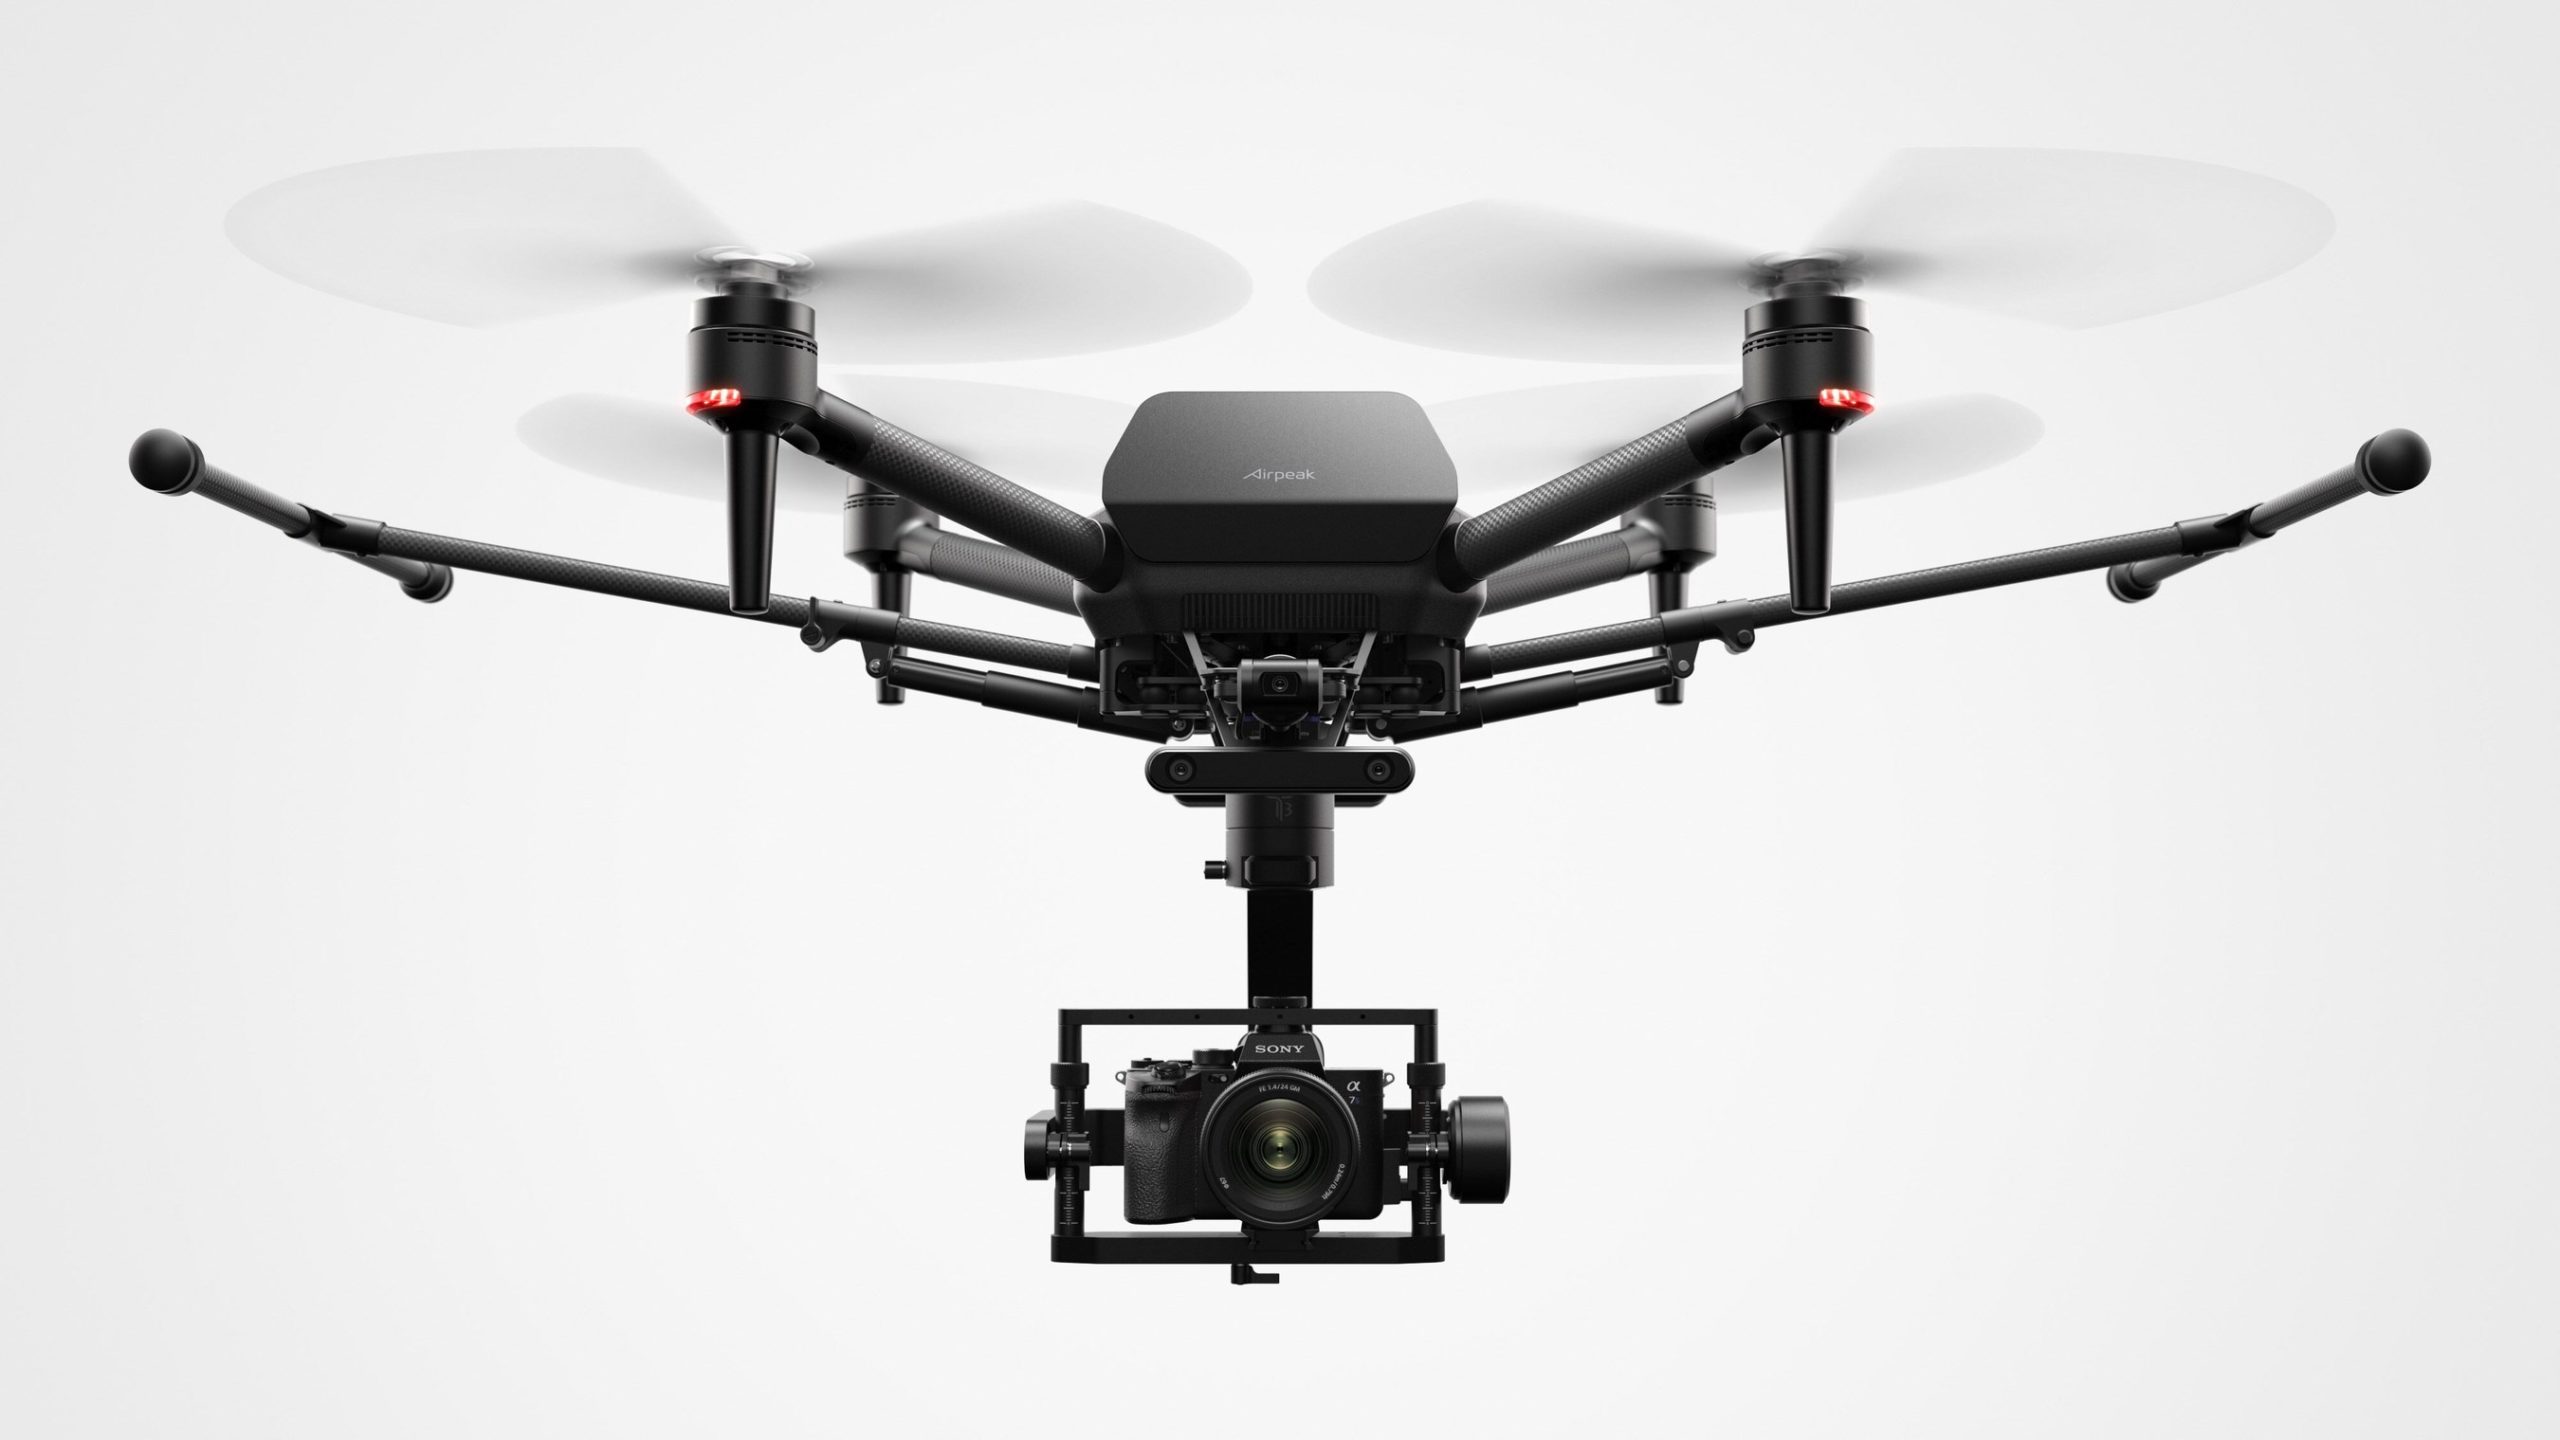 Sony Electronics Inc. today announced their first-ever professional drone, the “Airpeak S1”i.  An introductory model in the new Airpeak line,